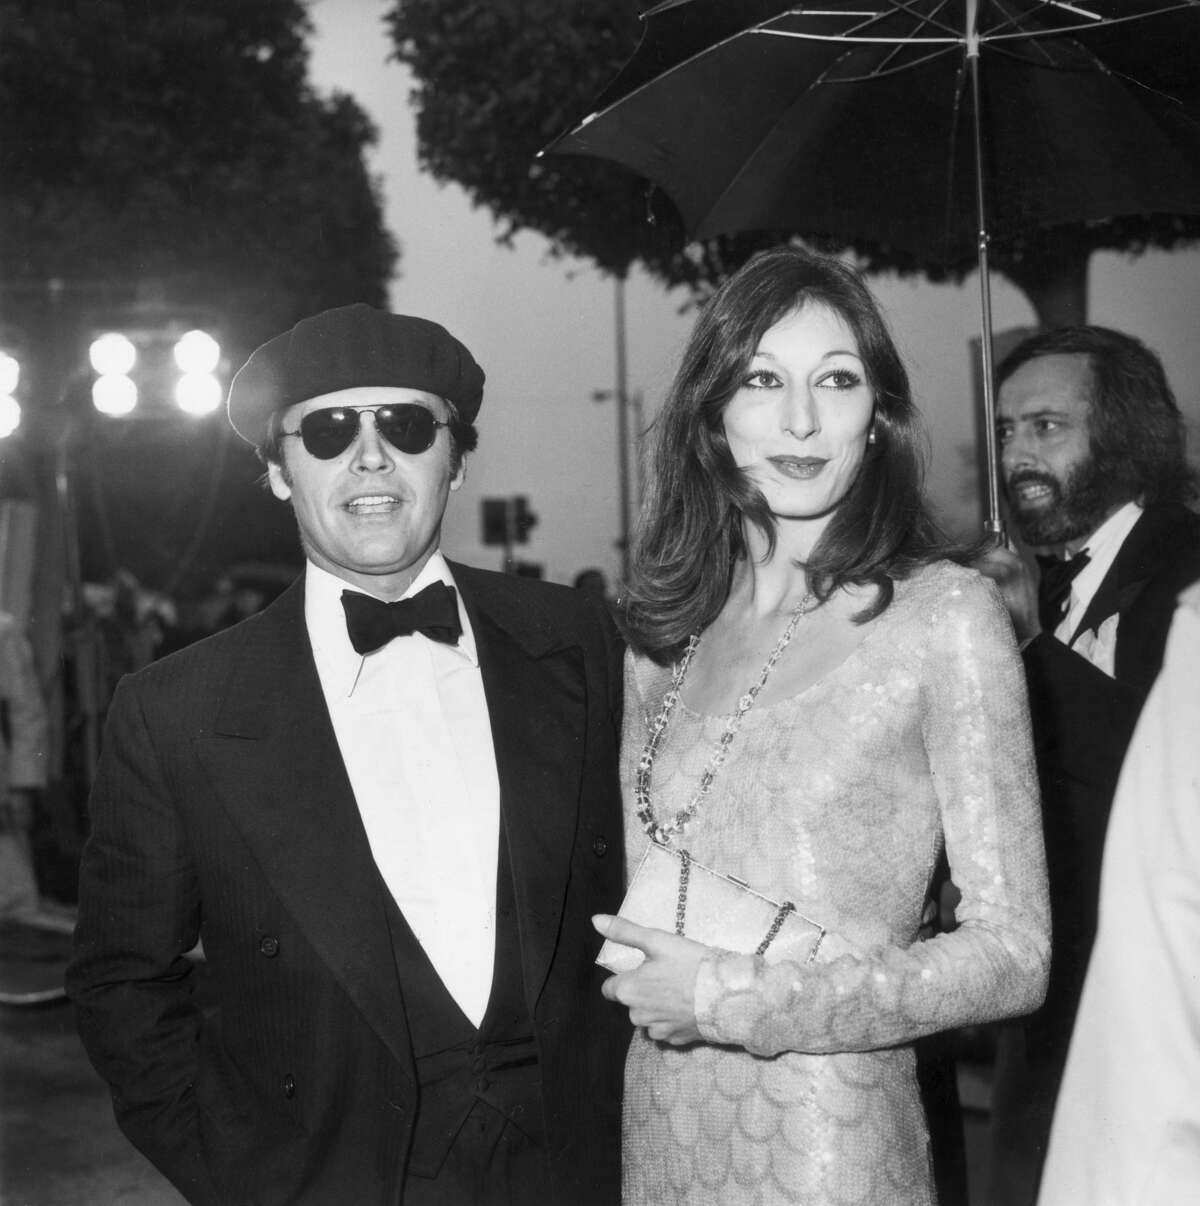 Jack Nicholson and Anjelica Huston arrive together at the Academy Awards on April 8, 1975. They dated on-again, off-again until 1989.